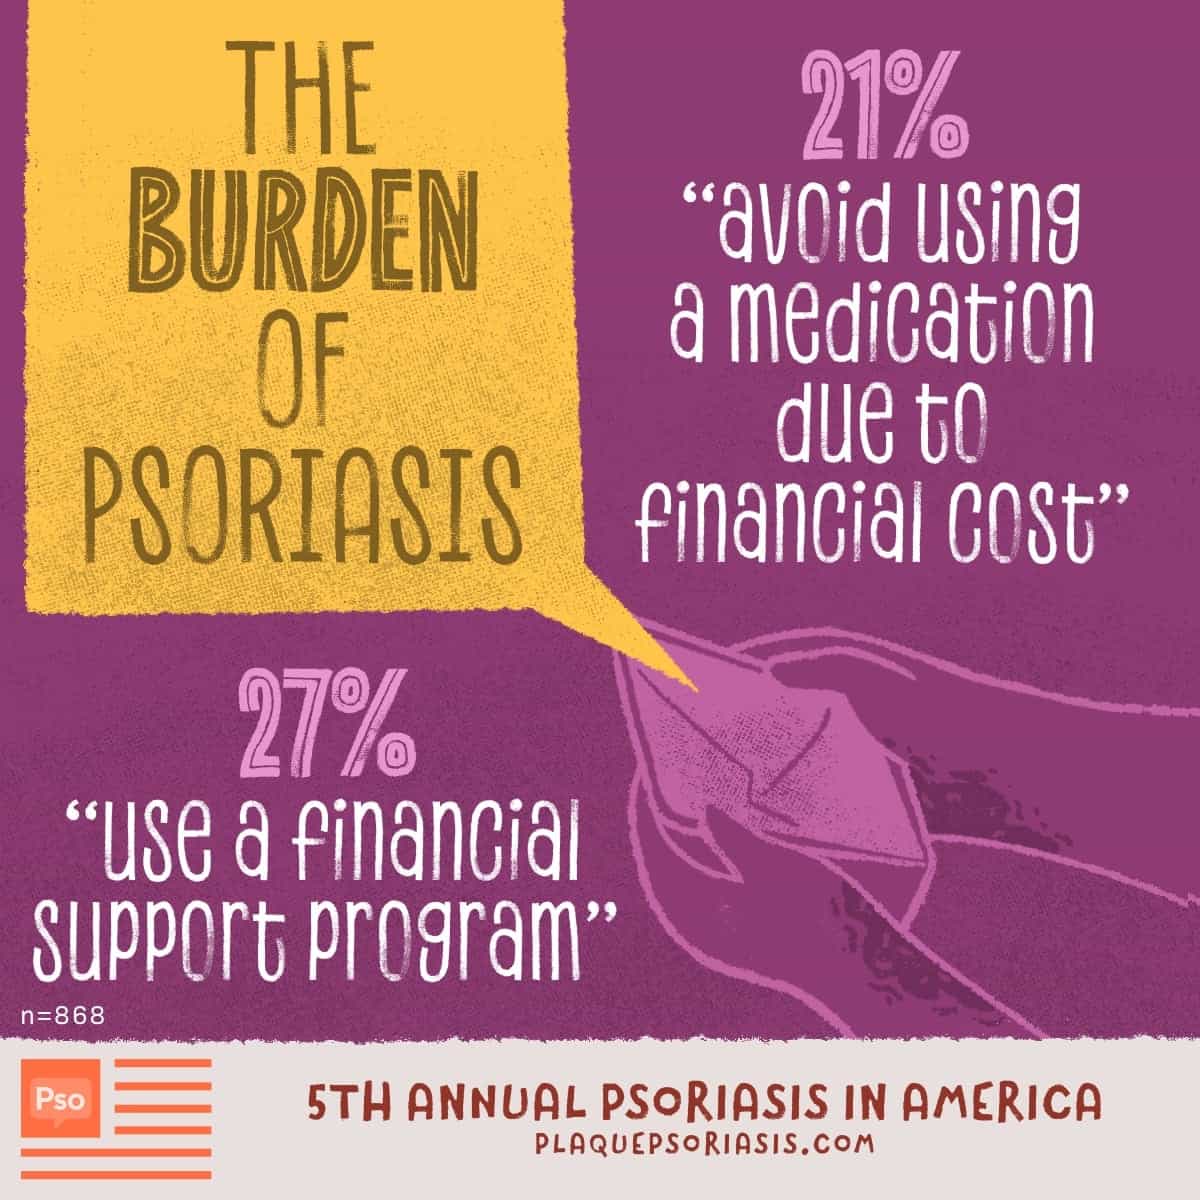 An image of an open wallet to depict the financial burden of psoriasis.